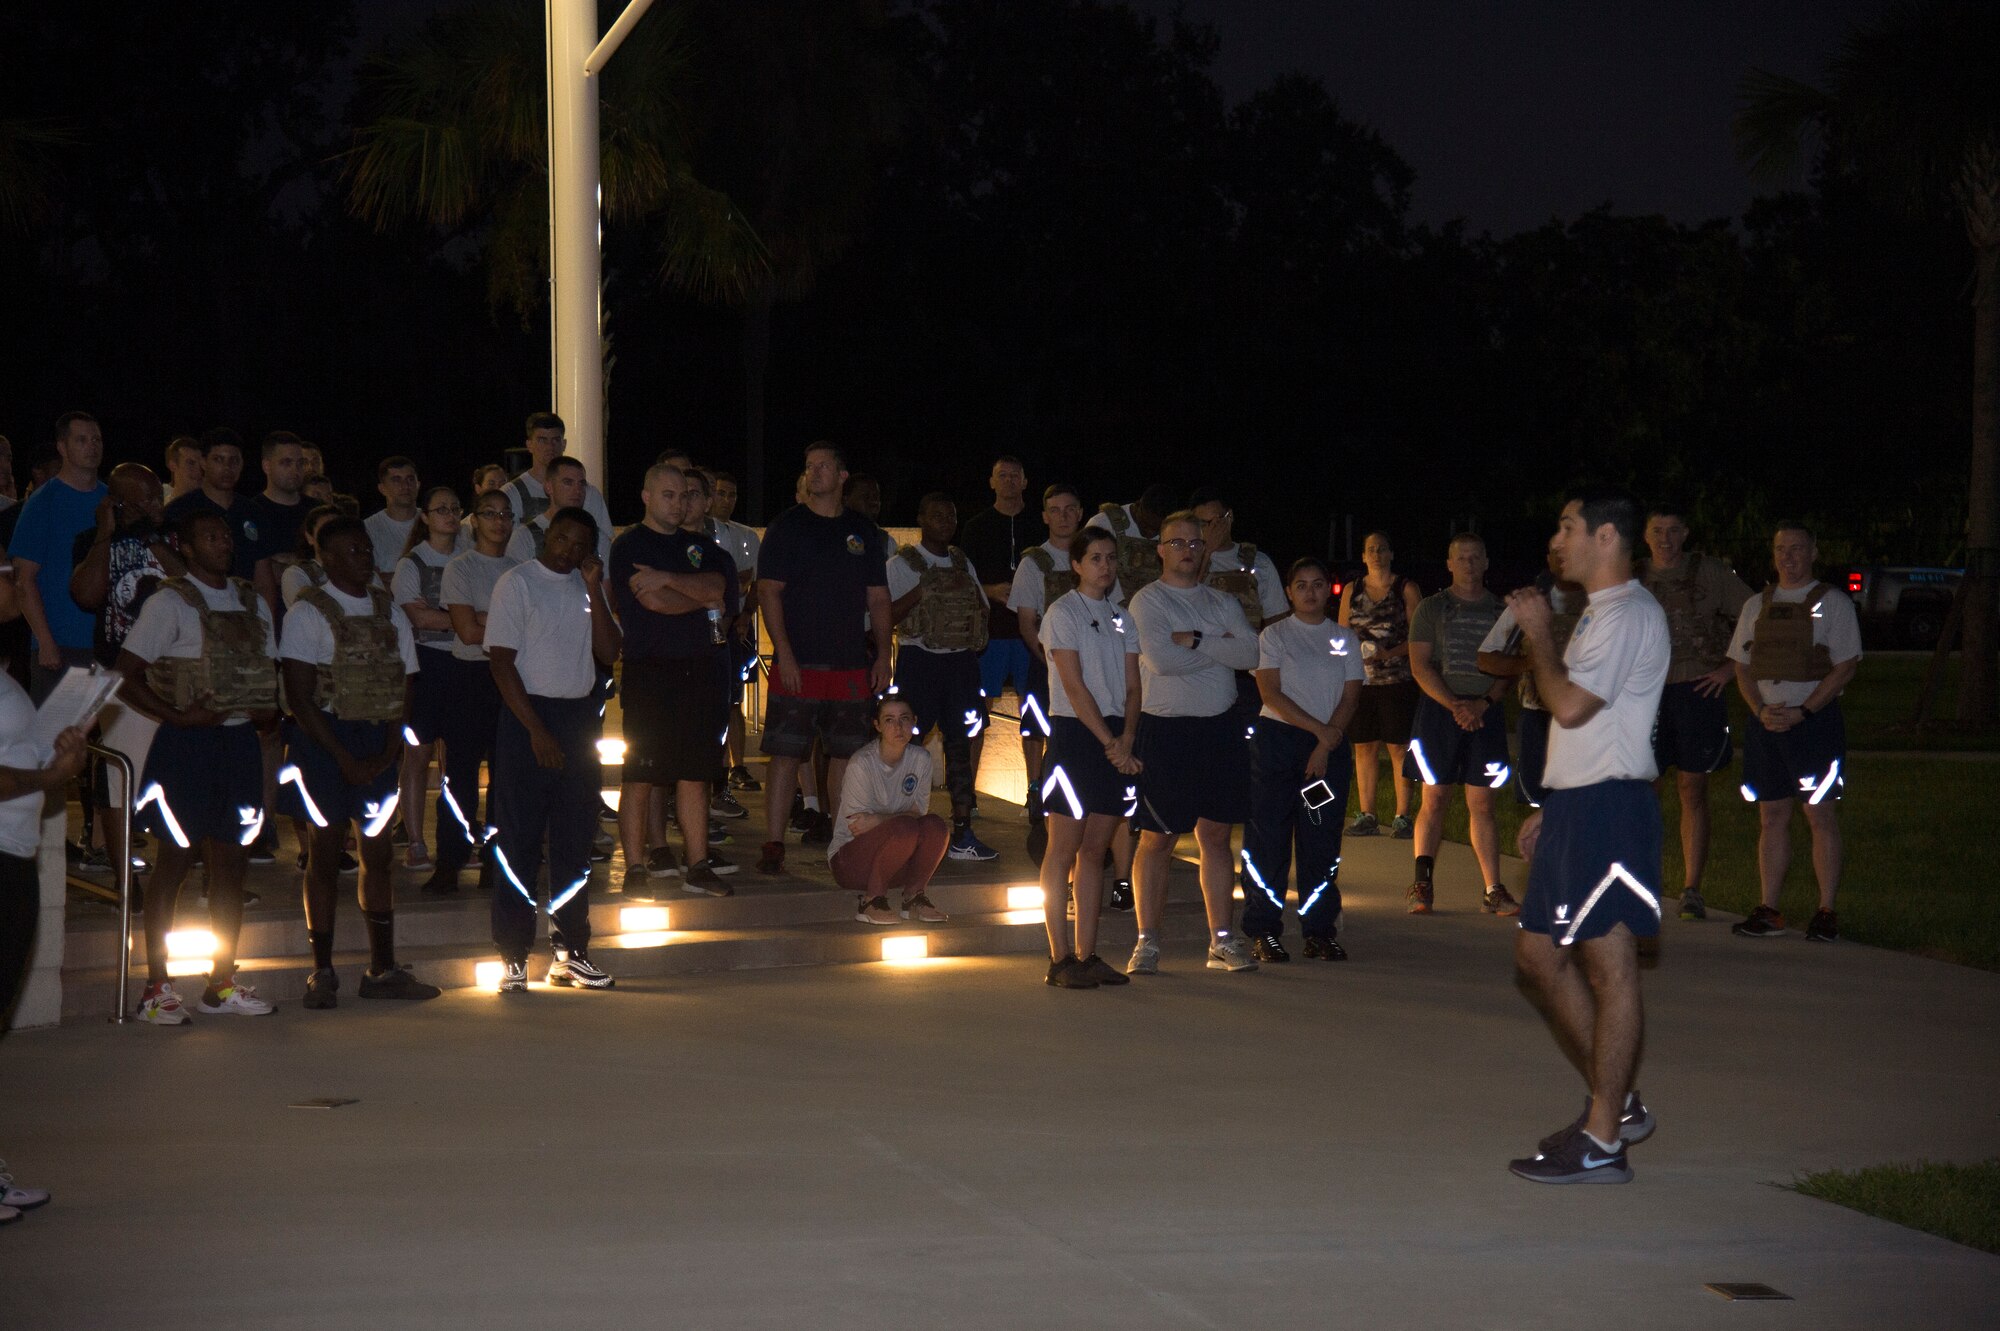 U.S. Air Force Col. Benjamin Robins, the 6th Air Mobility Wing vice commander, gives opening remarks prior to a POW/ MIA Recognition Day 5K, Sept. 20, 2019, at MacDill Air Force Base, Fla.  POW/MIA Recognition Day is commemorated nationally on the third Friday of every September in honor of service members who were prisoners of war as well as those missing in action. (U.S. Air Force photo by Airman 1st Class Shannon Bowman)